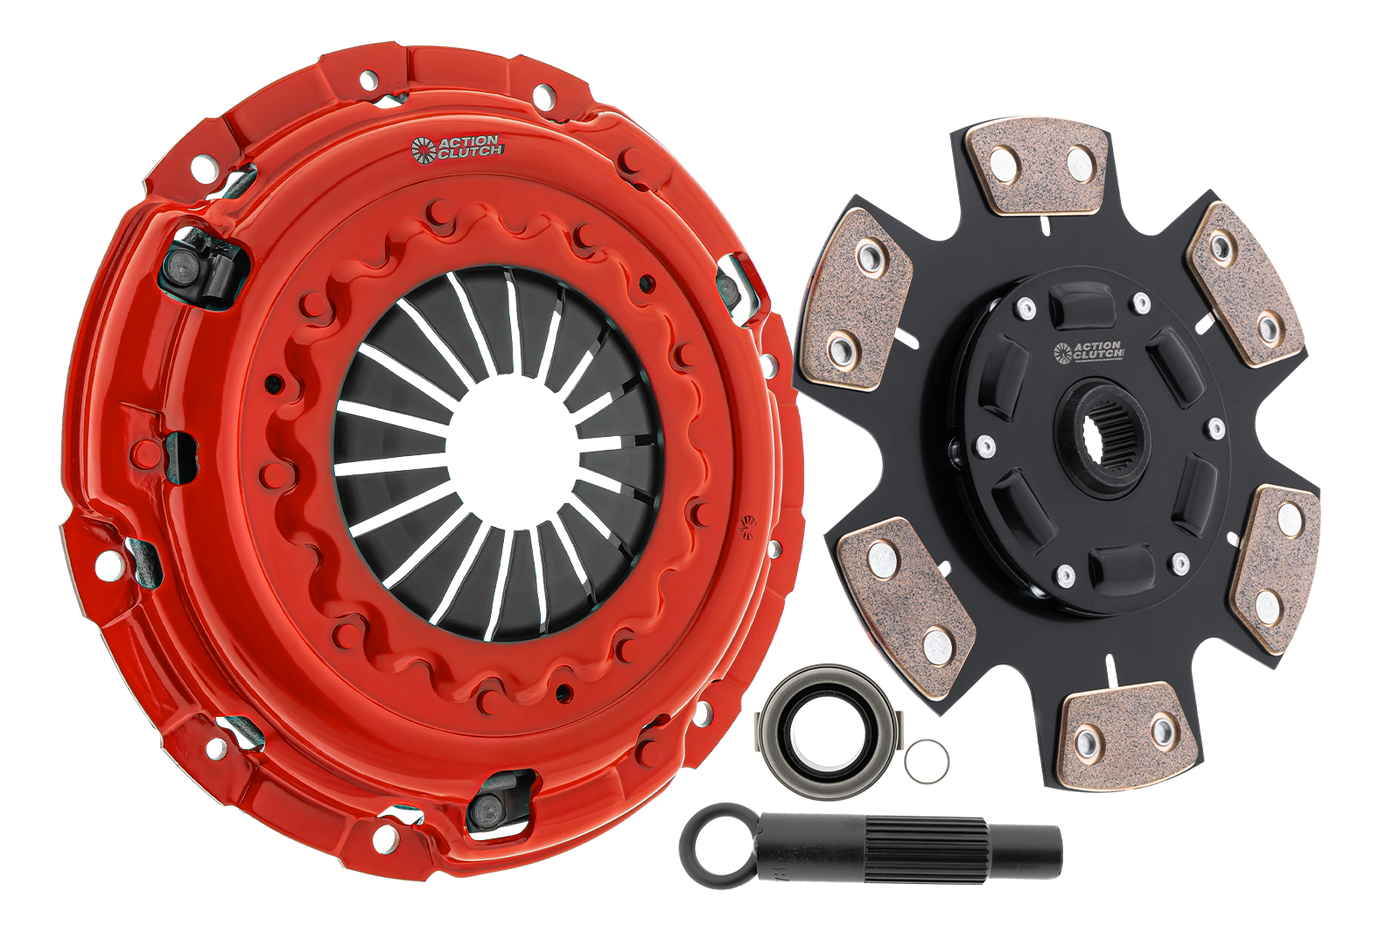 Stage 5 Clutch Kit (2MS) for Acura CL 2003 3.2L (J32)